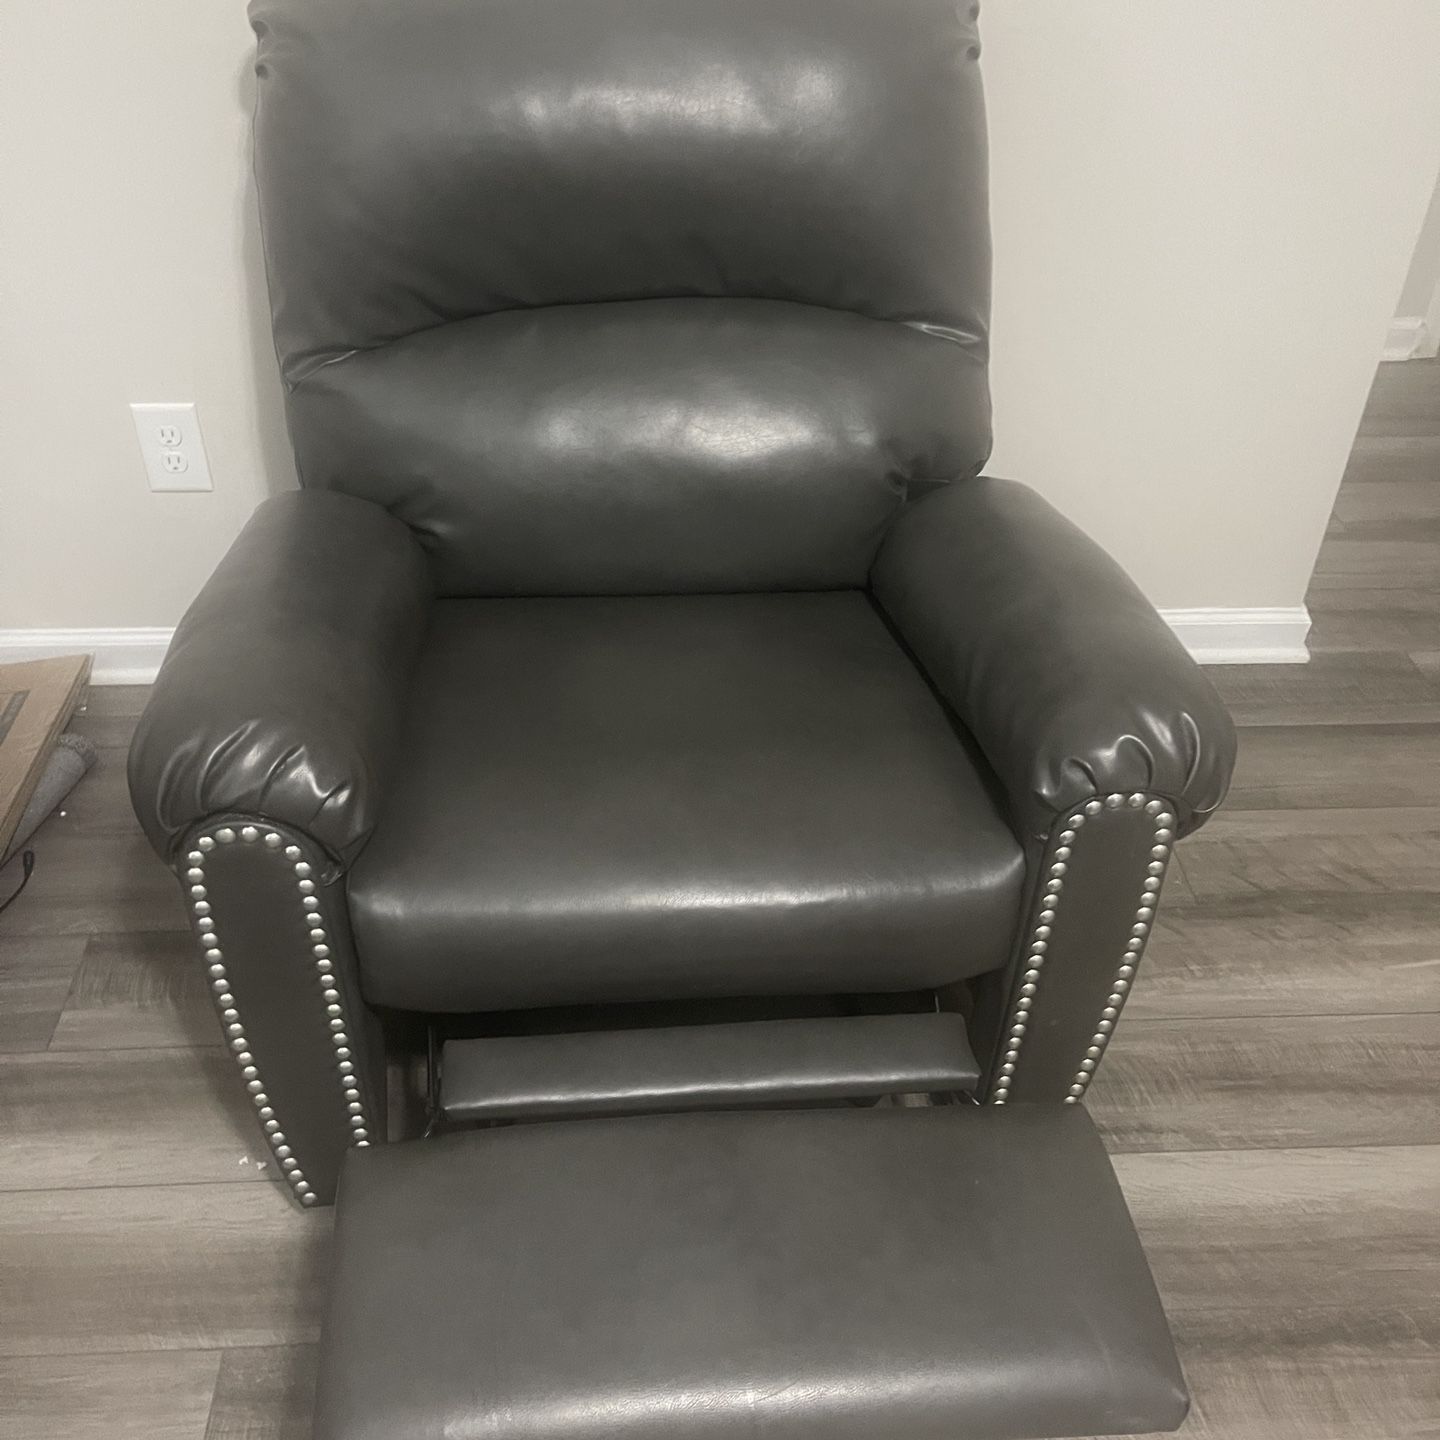 Ashley Signature Recliner VERY COMFORTABLE